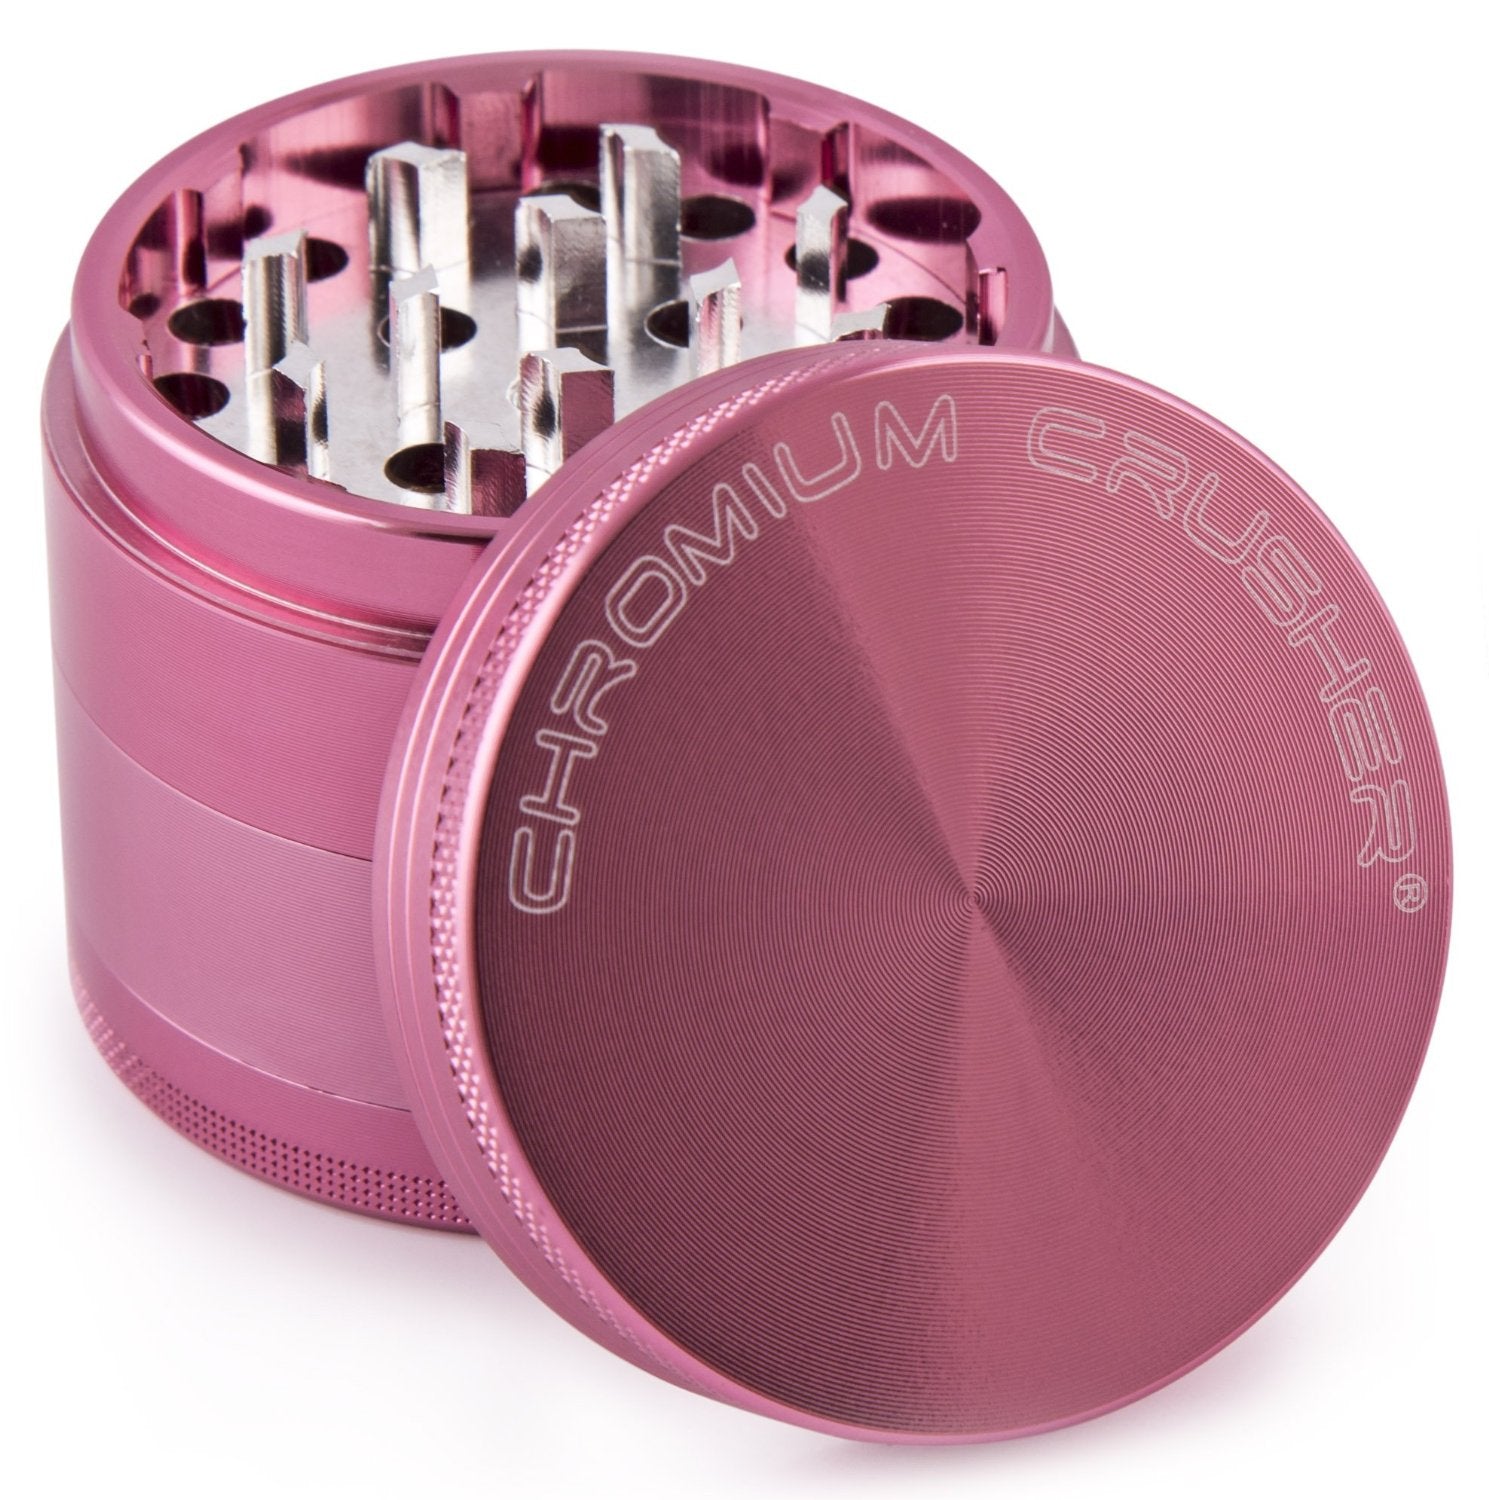 Chromium Crusher 1.6 Inch 4 Piece Tobacco Spice Herb Grinder pink colors